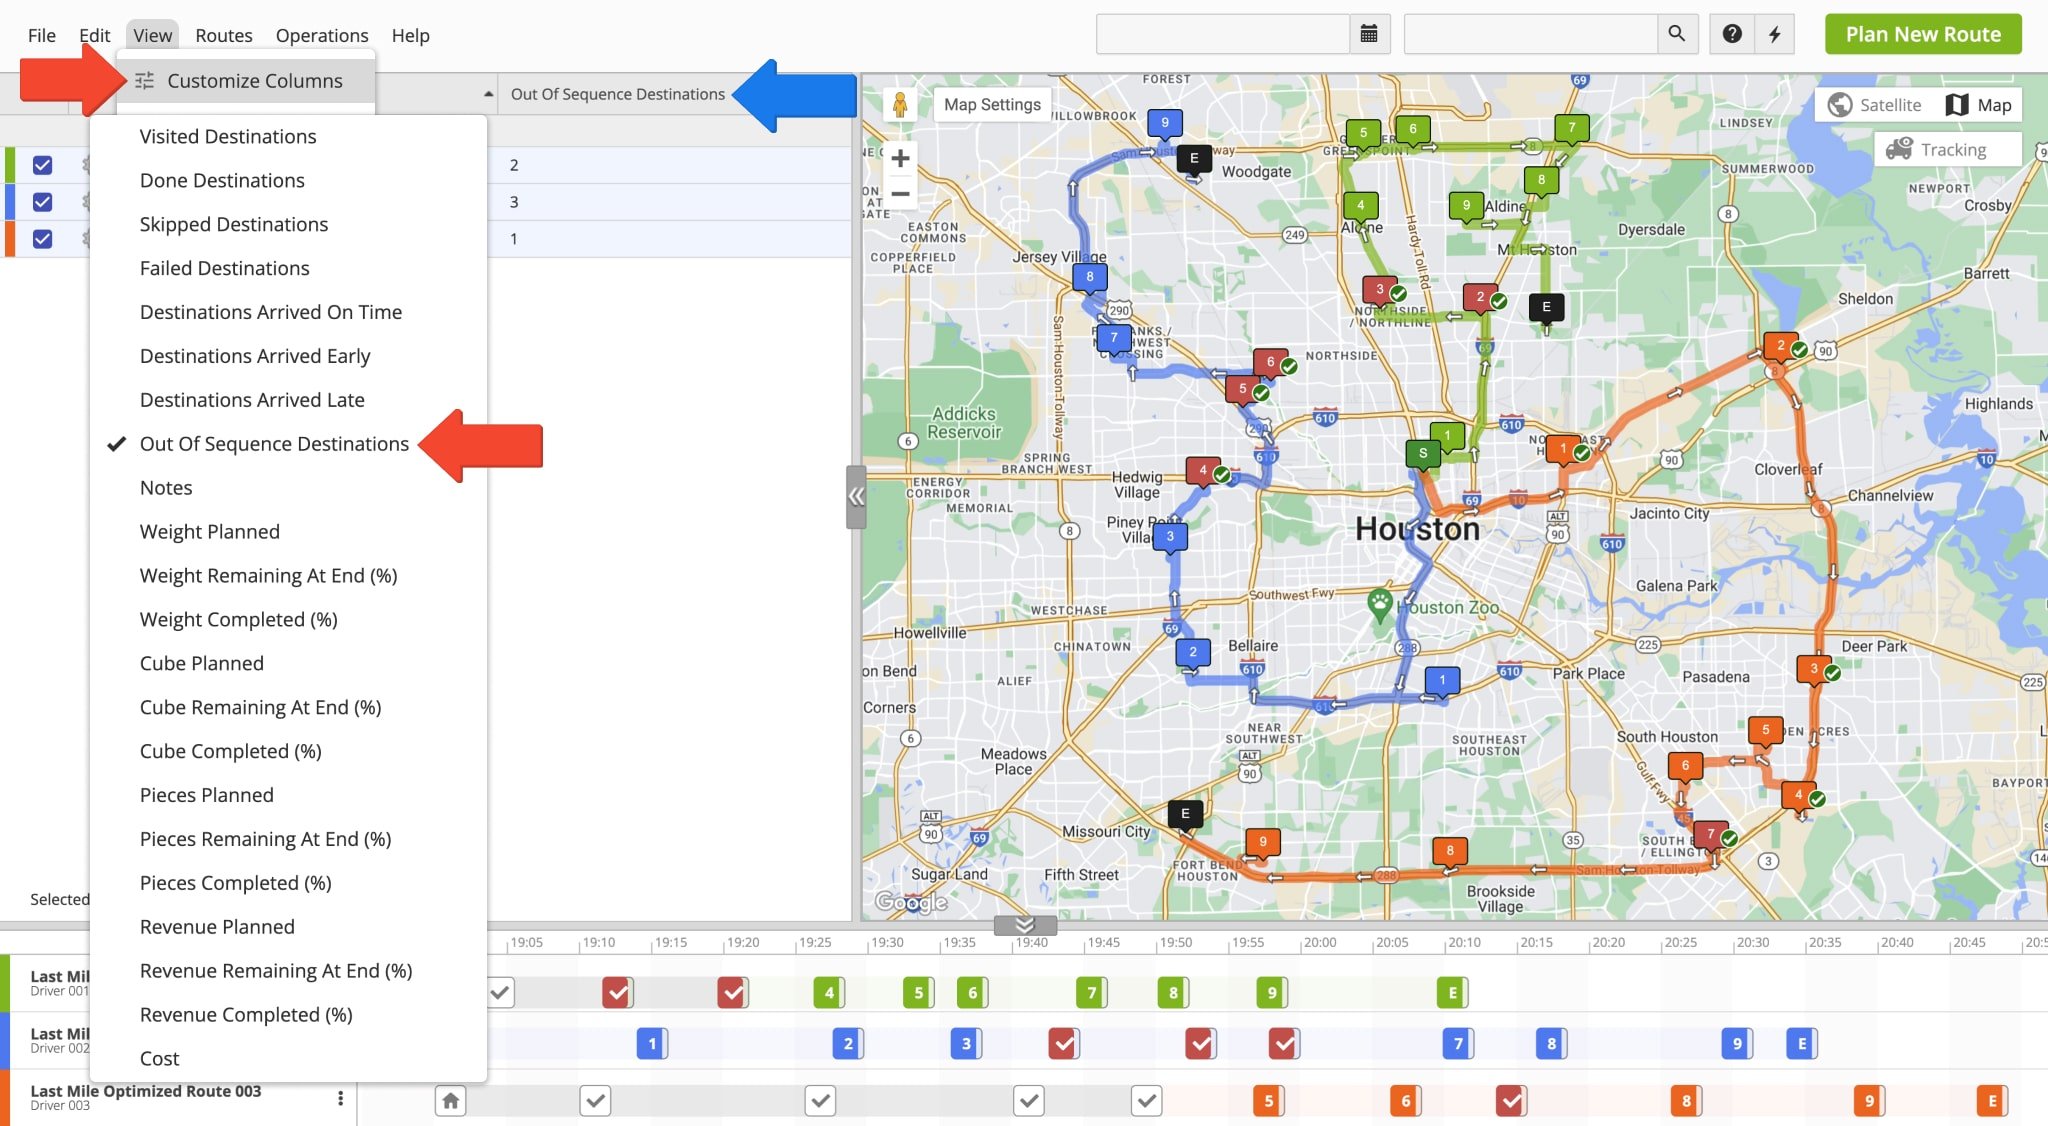 The Routes Map enables you to view Destinations Out of Sequence for each selected route on the customizable route data table.